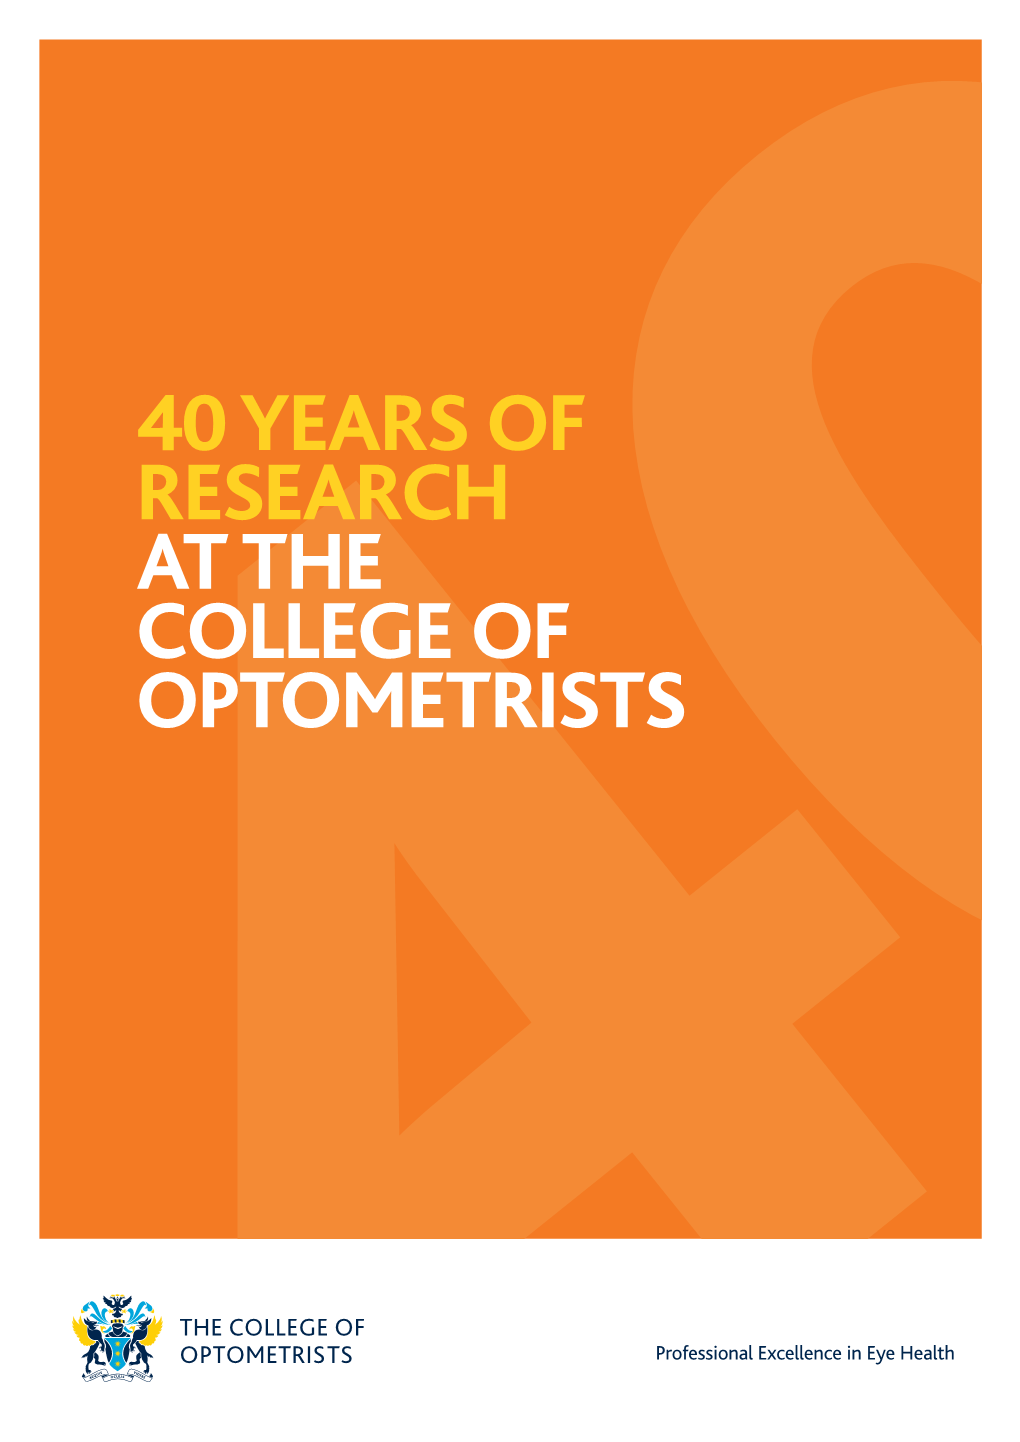 40 Years of Research at the College of Optometrists 40 Years of Research at the College of Optometrists